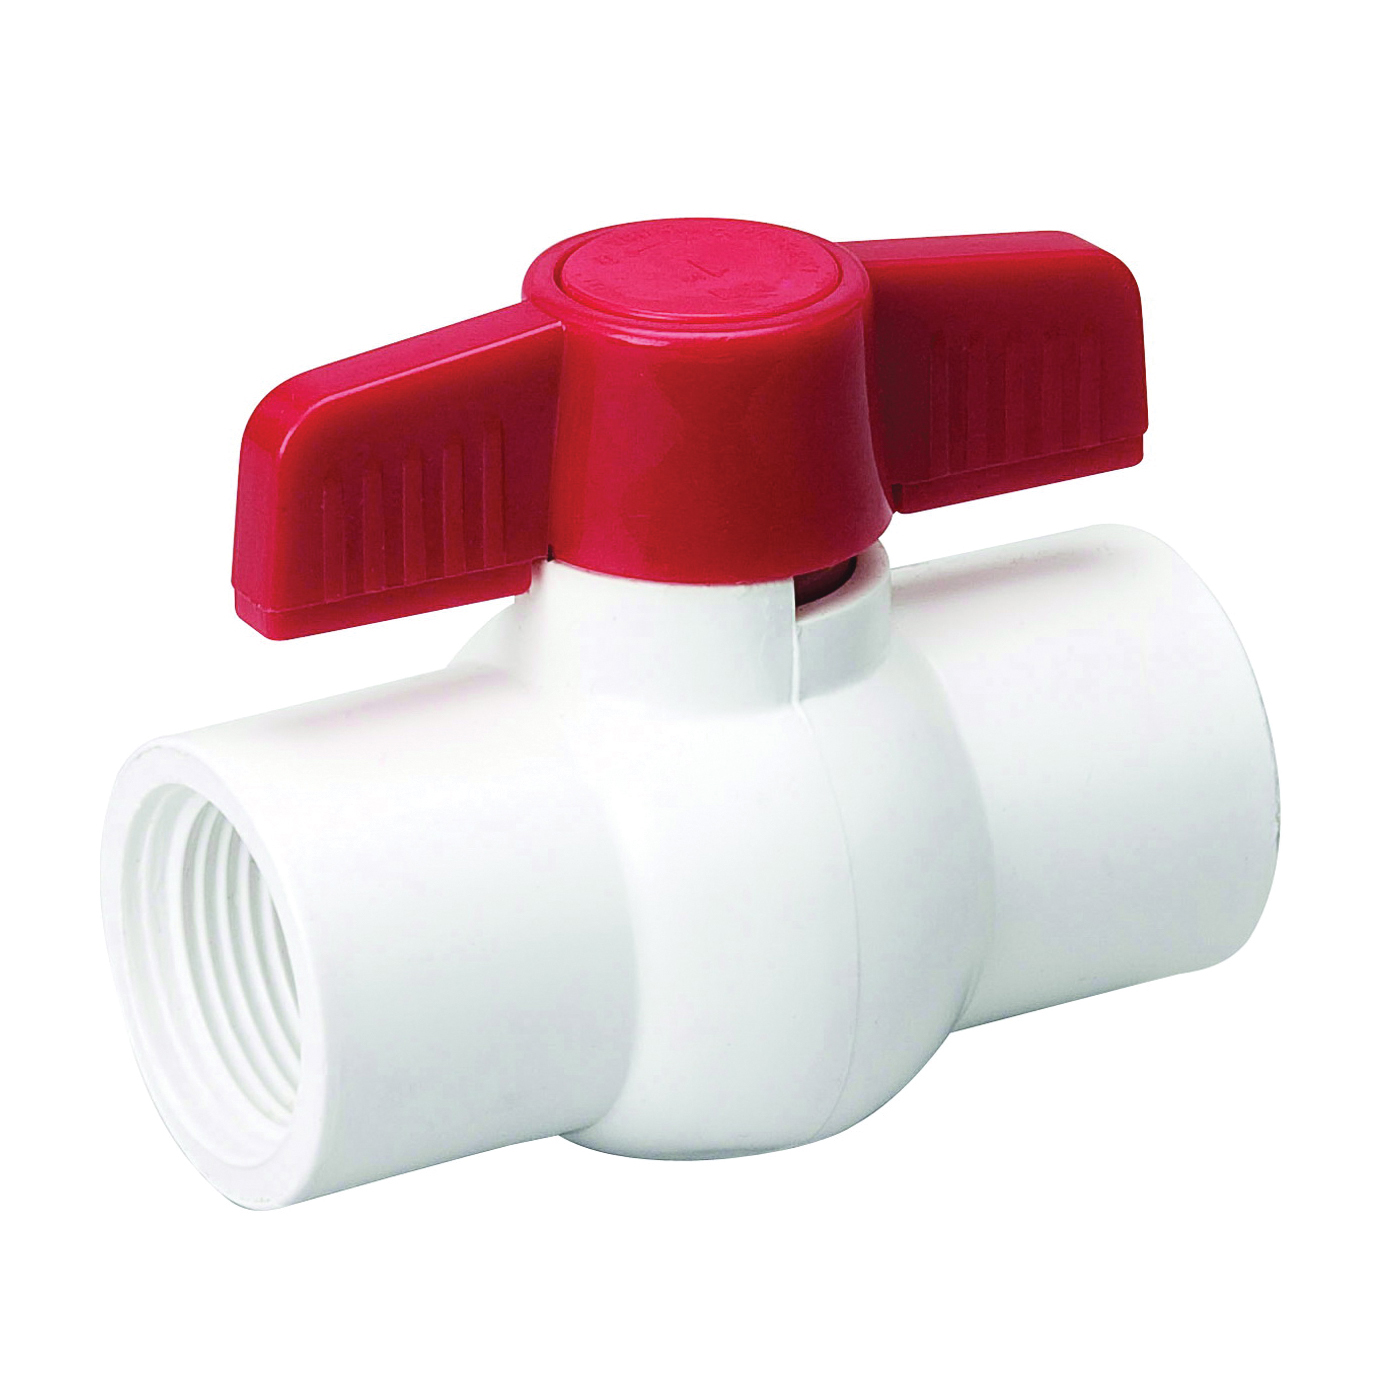 107-134HC Ball Valve, 3/4 in Connection, FPT x FPT, 150 psi Pressure, PVC Body